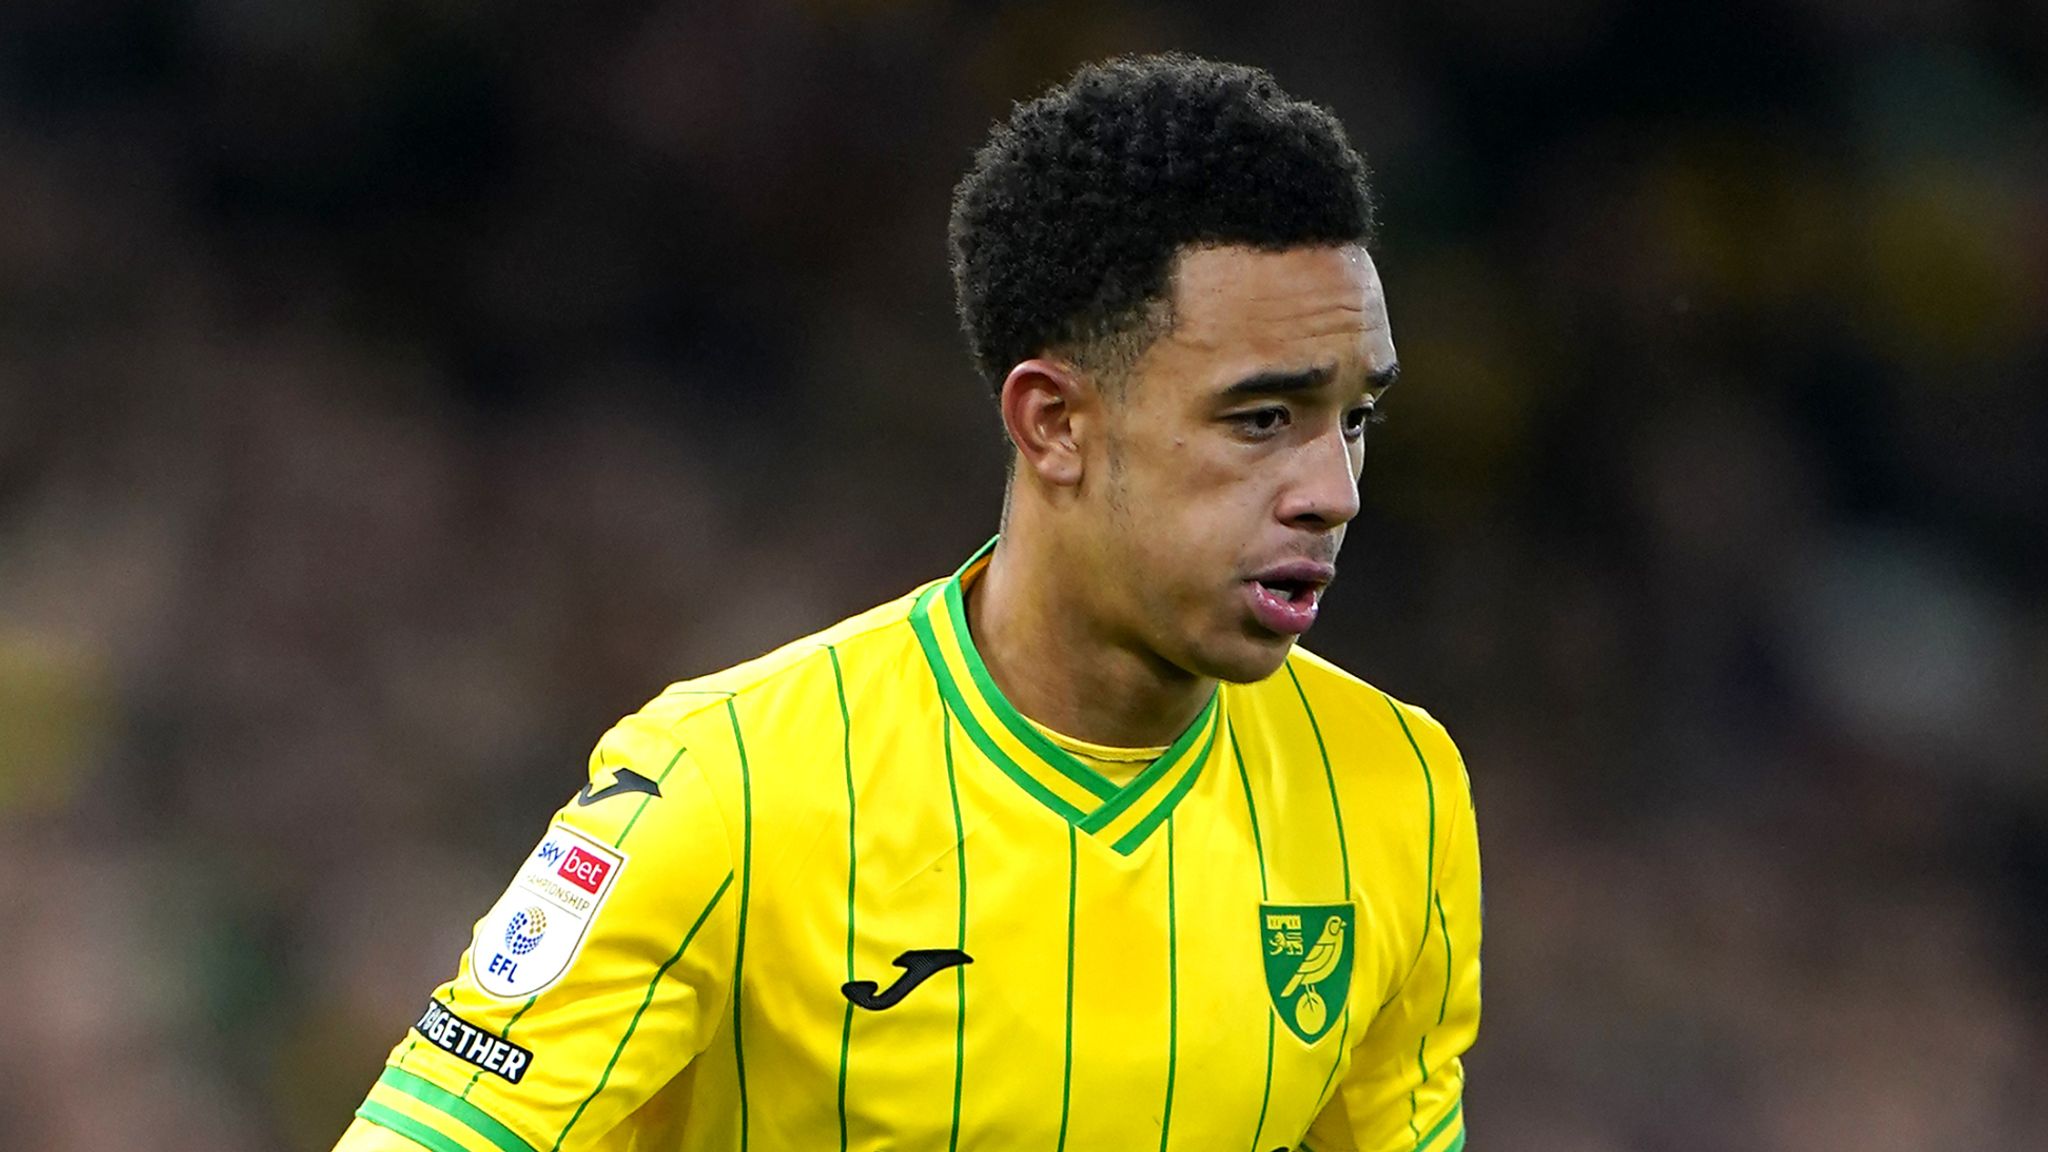 Norwich City 0-0 Rotherham: Canaries held to goalless draw